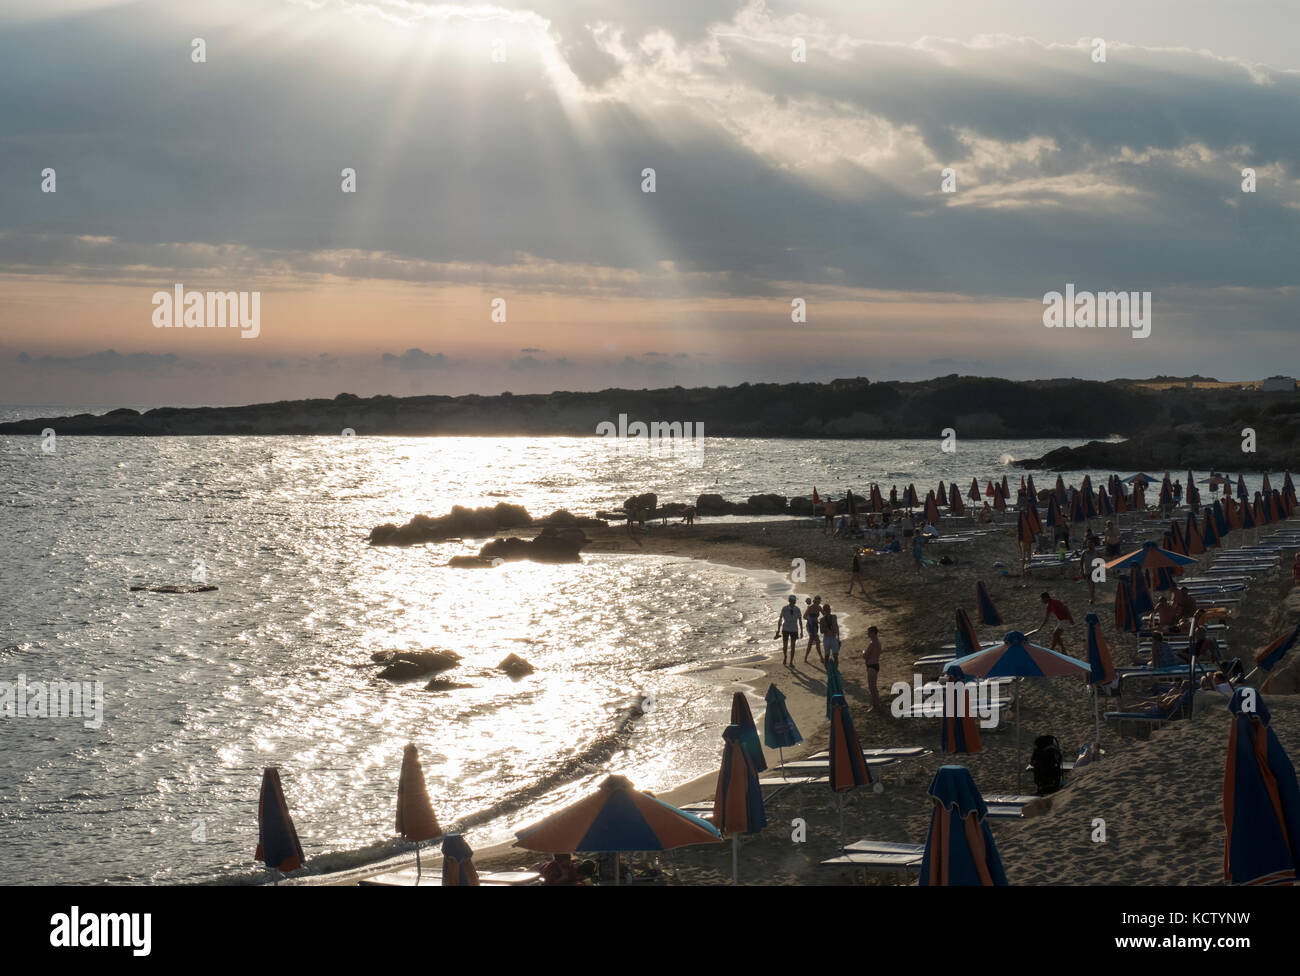 Sunrays burst through from behind the clouds at Coral Bay in the Peyia district, near Paphos, Cyprus. Stock Photo